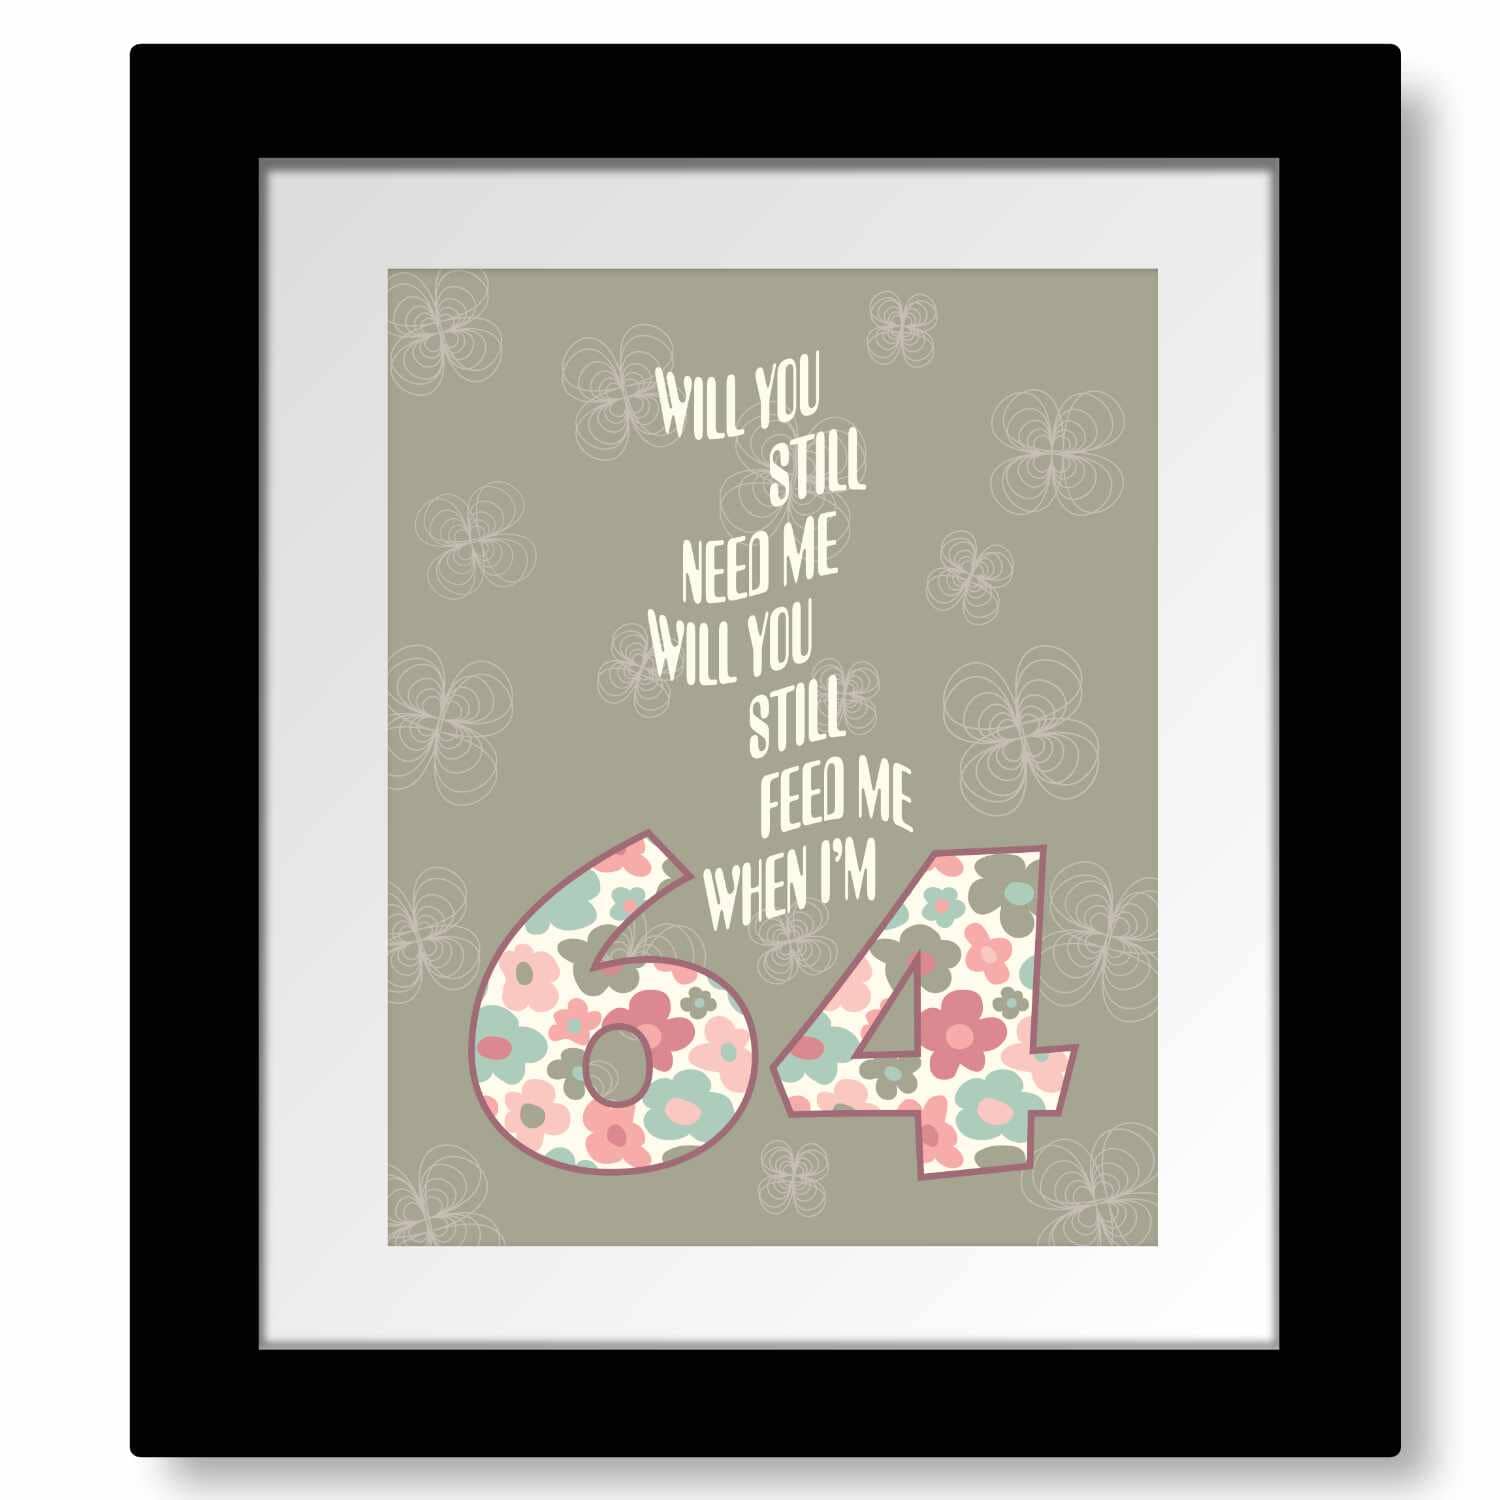 When I'm Sixty-Four 64 by the Beatles - Song Lyric Art Print Song Lyrics Art Song Lyrics Art 8x10 Matted and Framed Print 